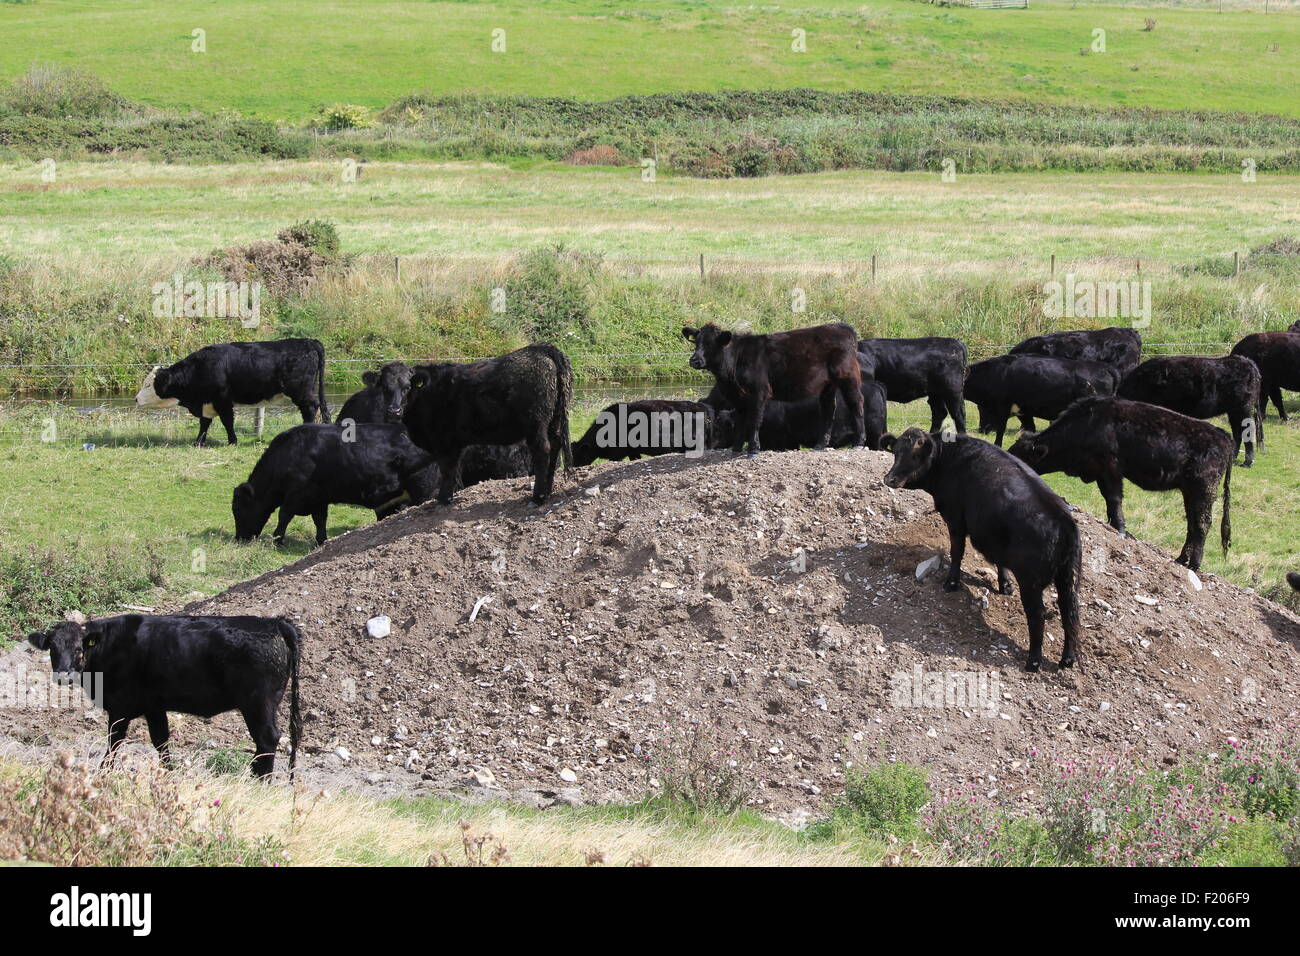 Welsh black cattle trample a mound of soil on a hot summers day near Aberystwyth Wales UK Stock Photo